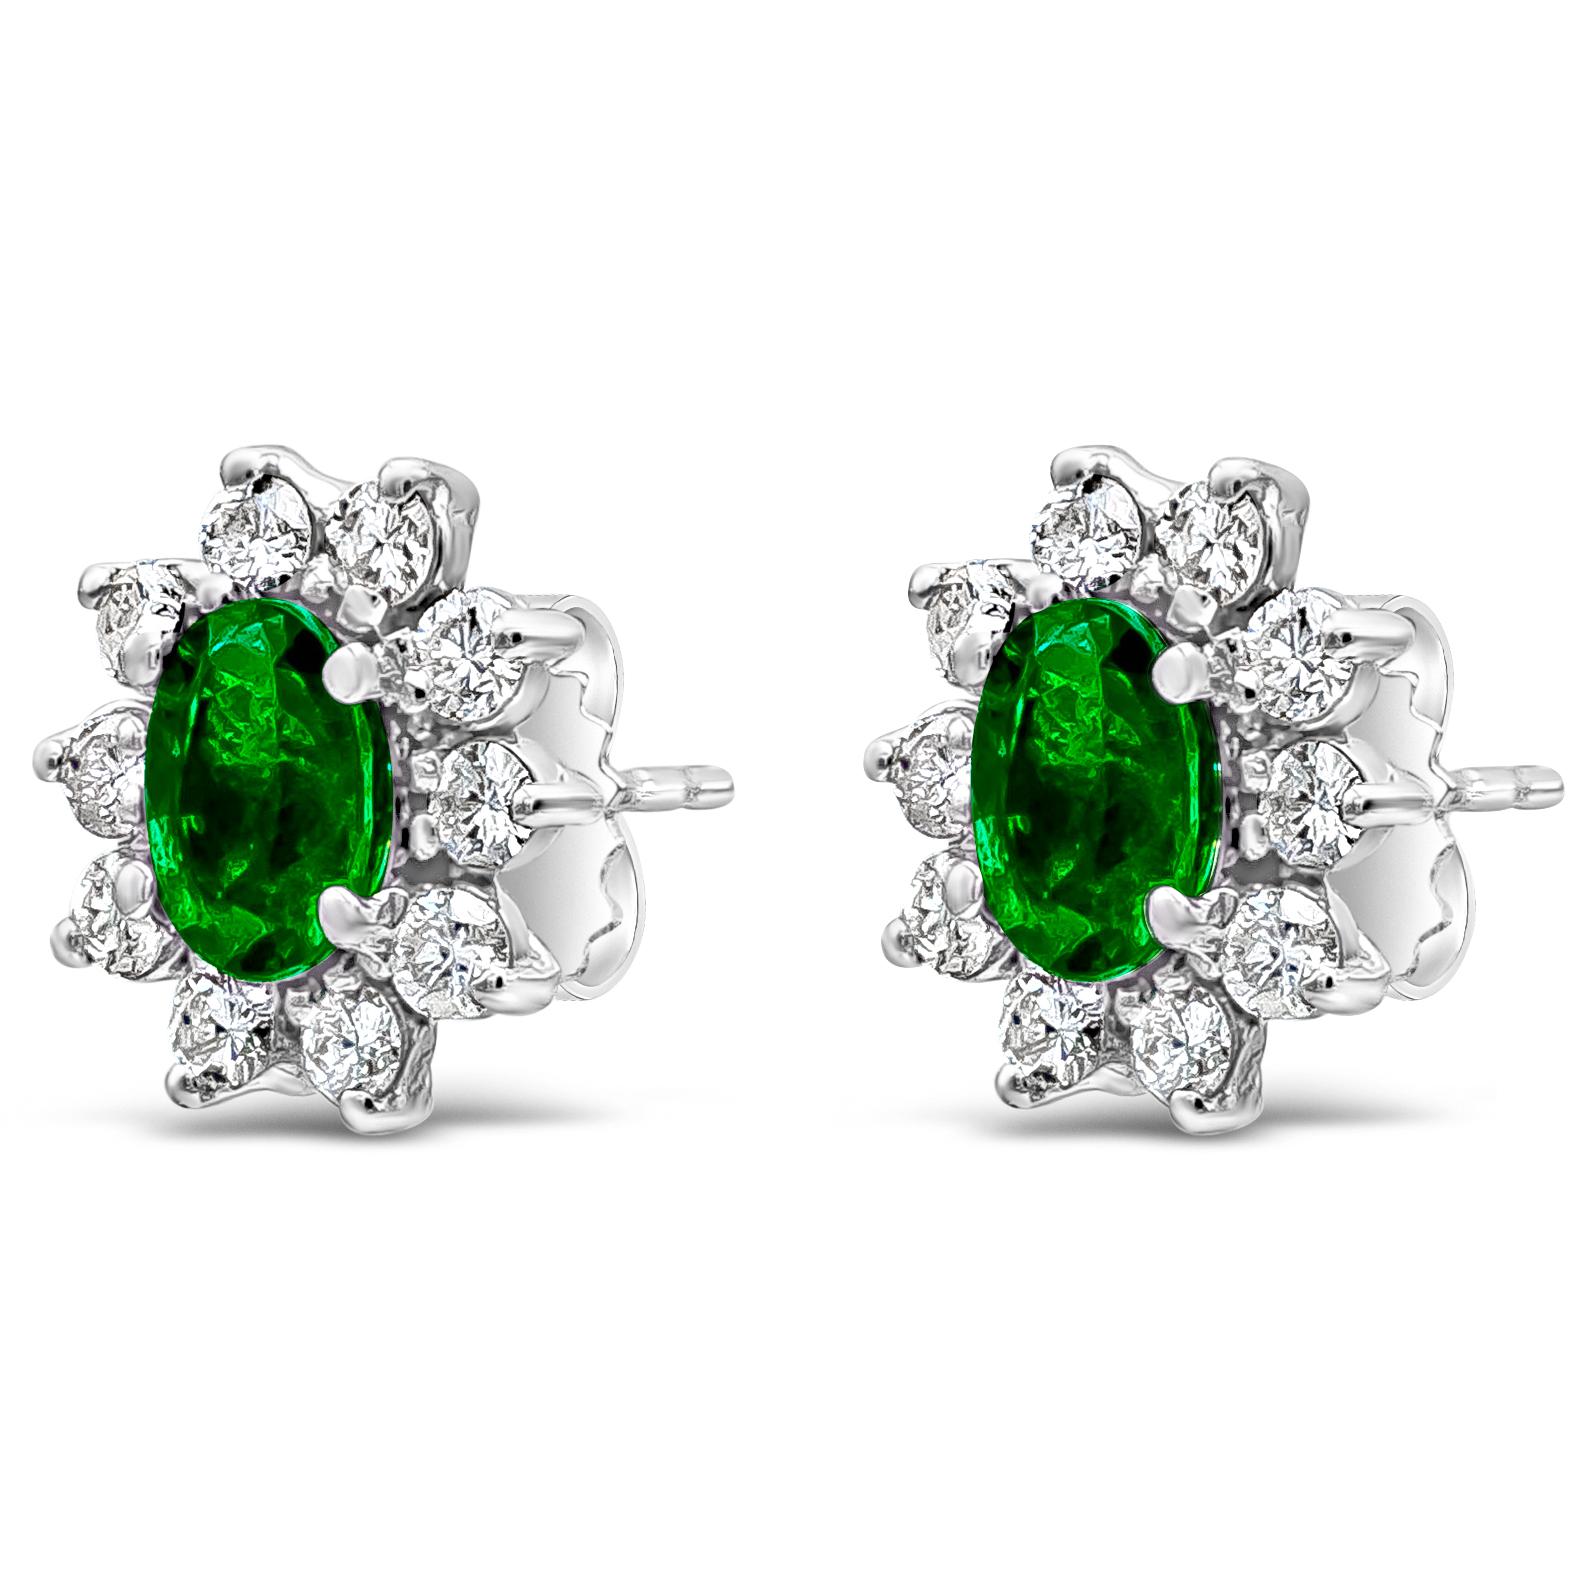 A classic pair of stud earrings in a floral-motif design showcasing oval cut green emeralds weighing 1.52 carats total. Surrounded by a single row of round brilliant diamonds weighing 1 carat total. Made with 18K White Gold

Style available in